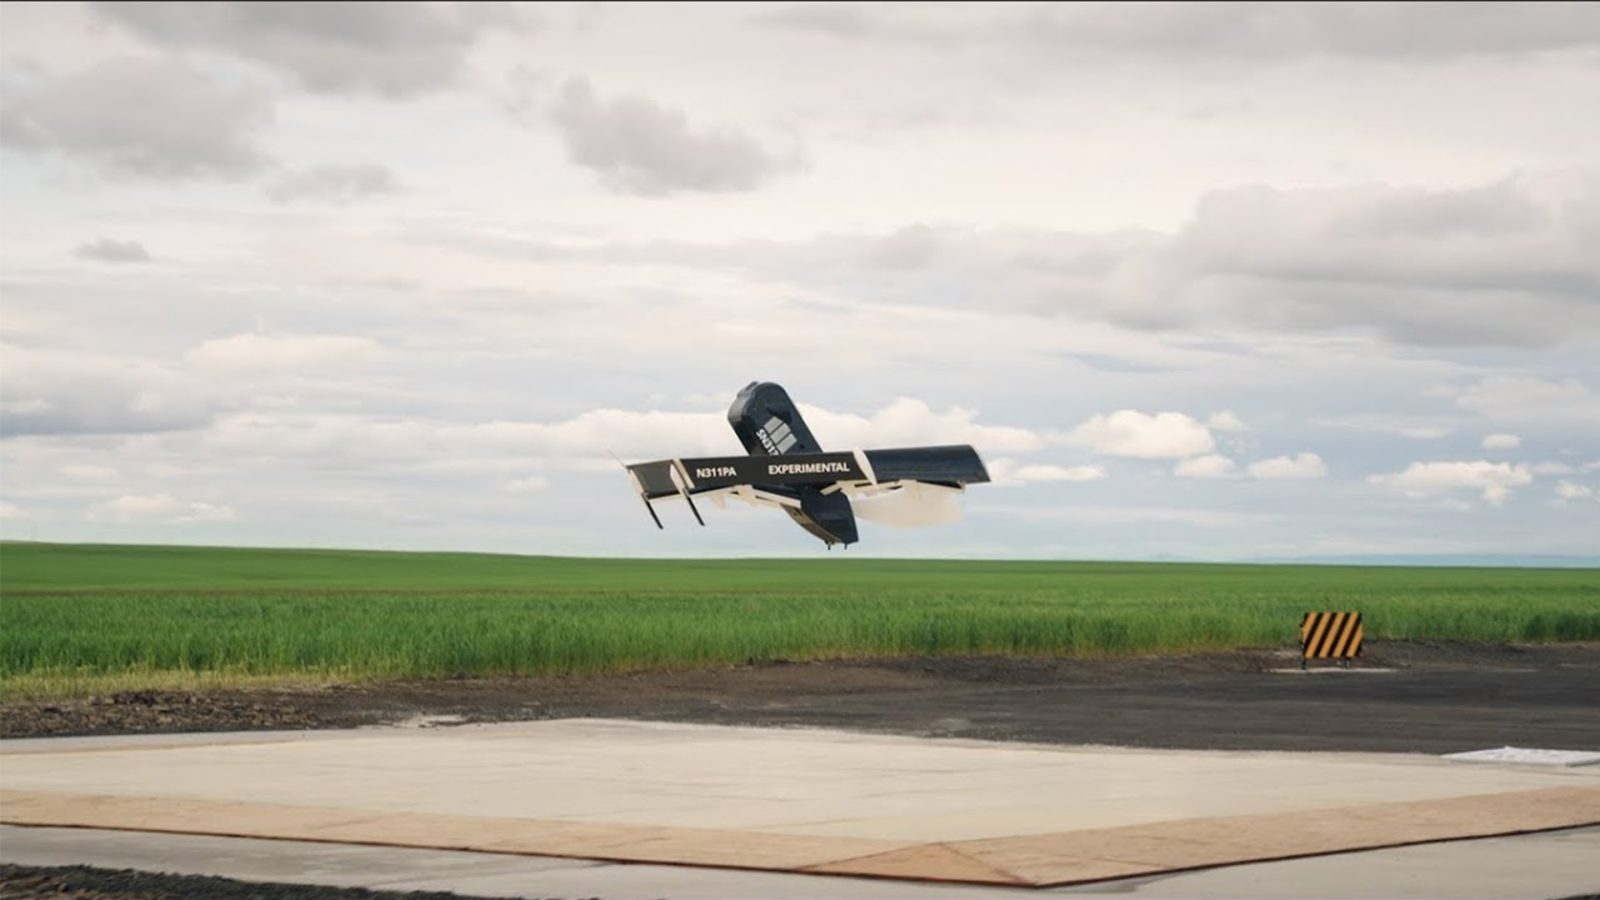 testing delivery by drone, CEO Bezos says